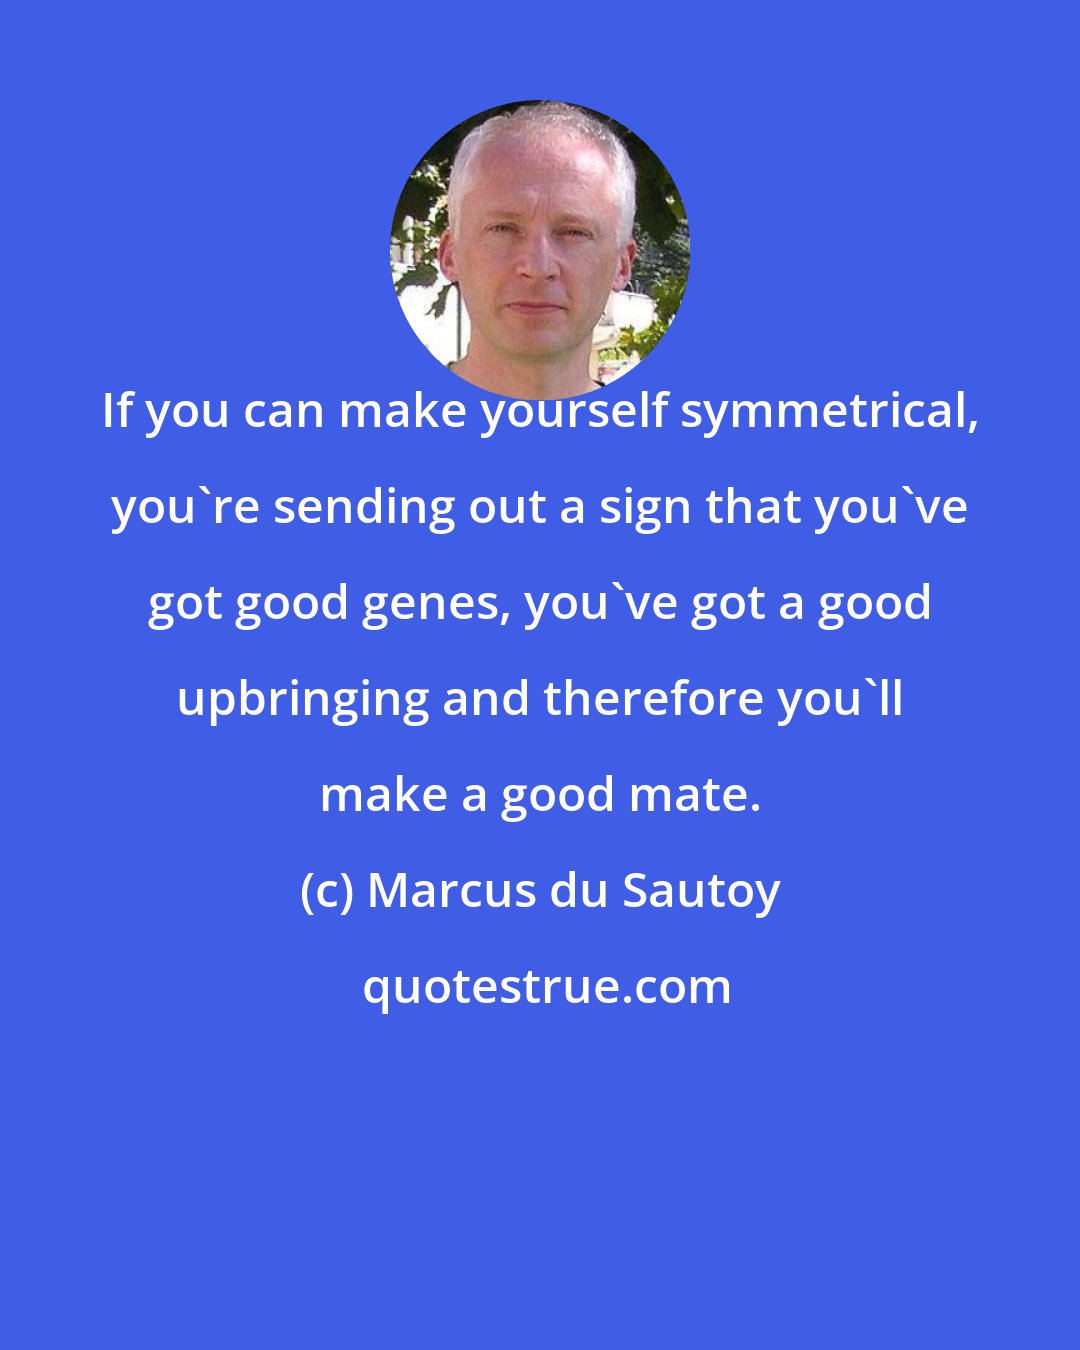 Marcus du Sautoy: If you can make yourself symmetrical, you're sending out a sign that you've got good genes, you've got a good upbringing and therefore you'll make a good mate.